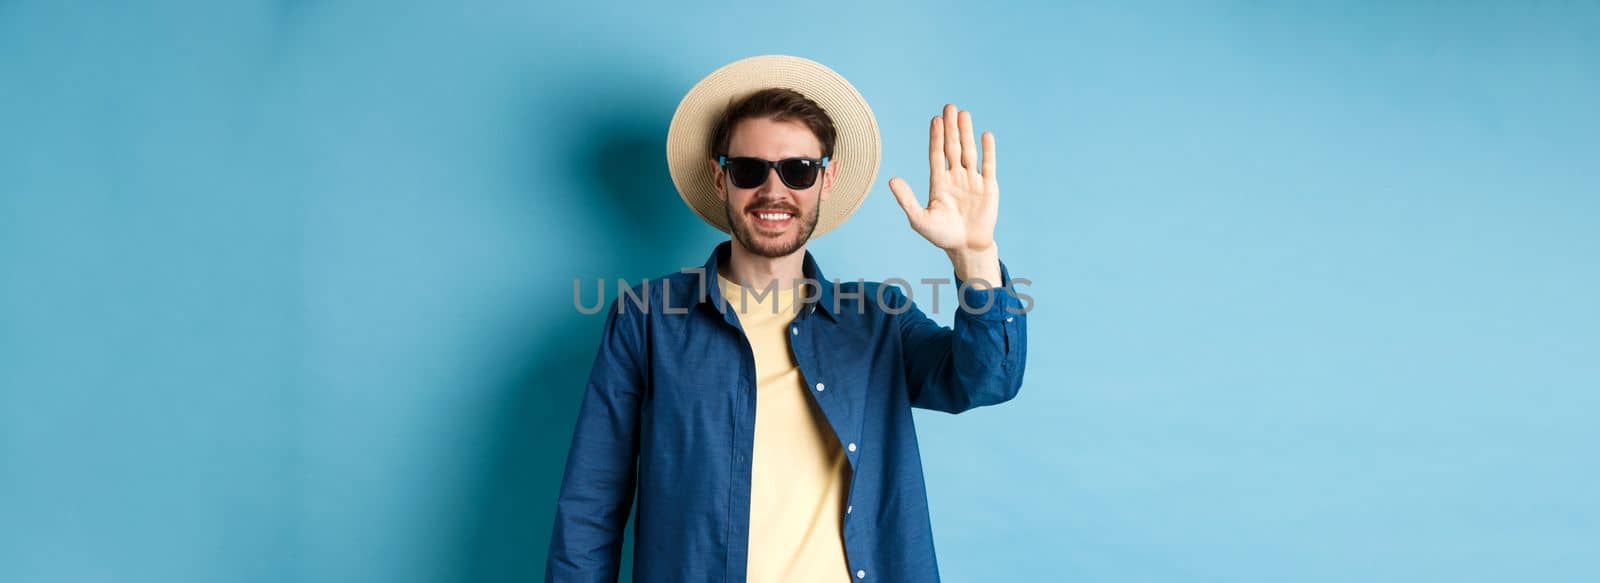 Handsome hipster on summer holiday, waiving hand and smiling, saying hello, wearing sunglasses and straw hat, blue background.